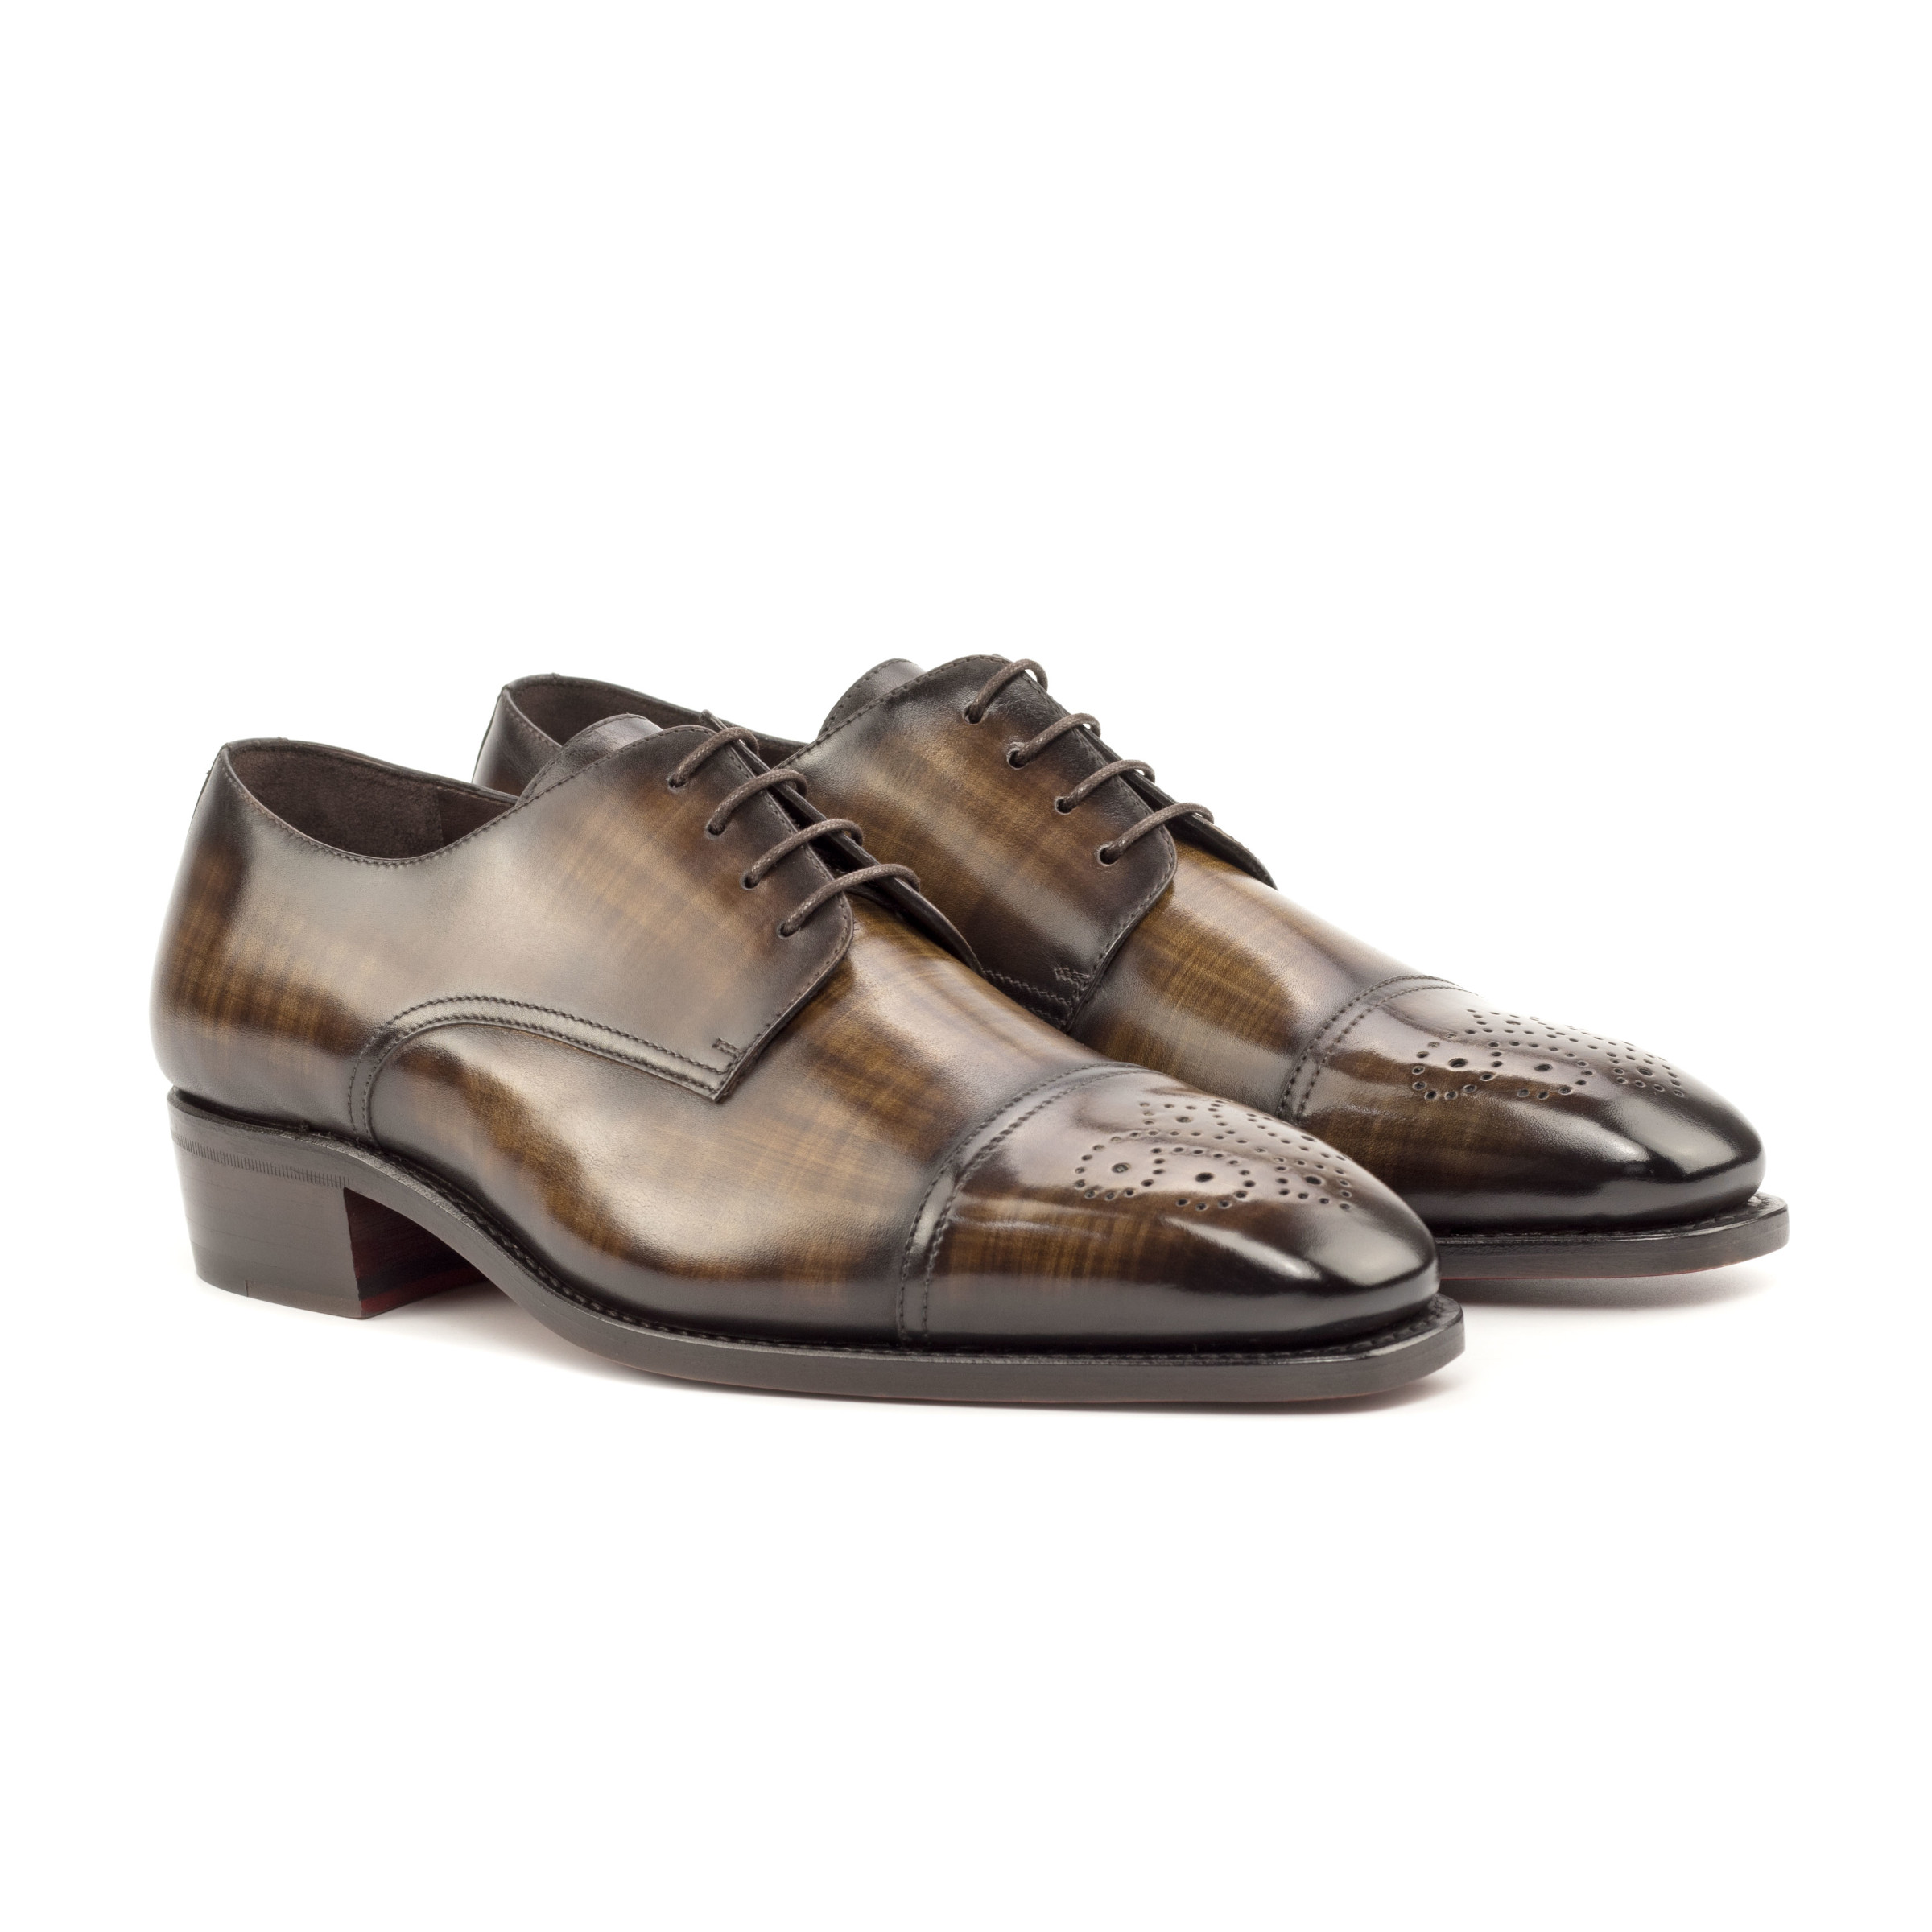 The Latus: Brown Patina. Front side view of brown patina leather men's style dress does with decorative toe cap and laces on a white background